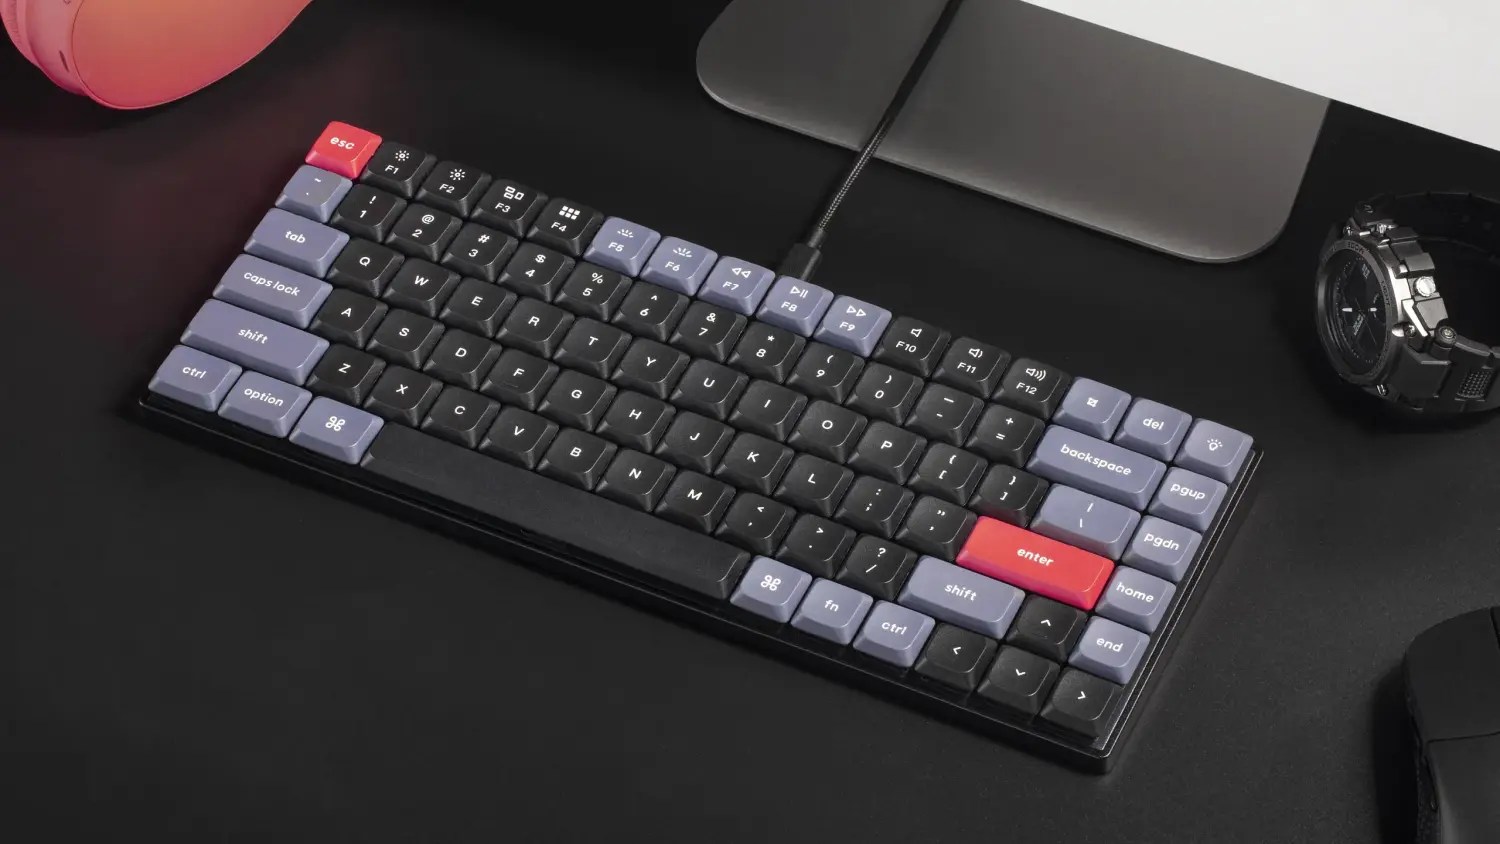 The Keychron S1 is a slimline keyboard with premium
features